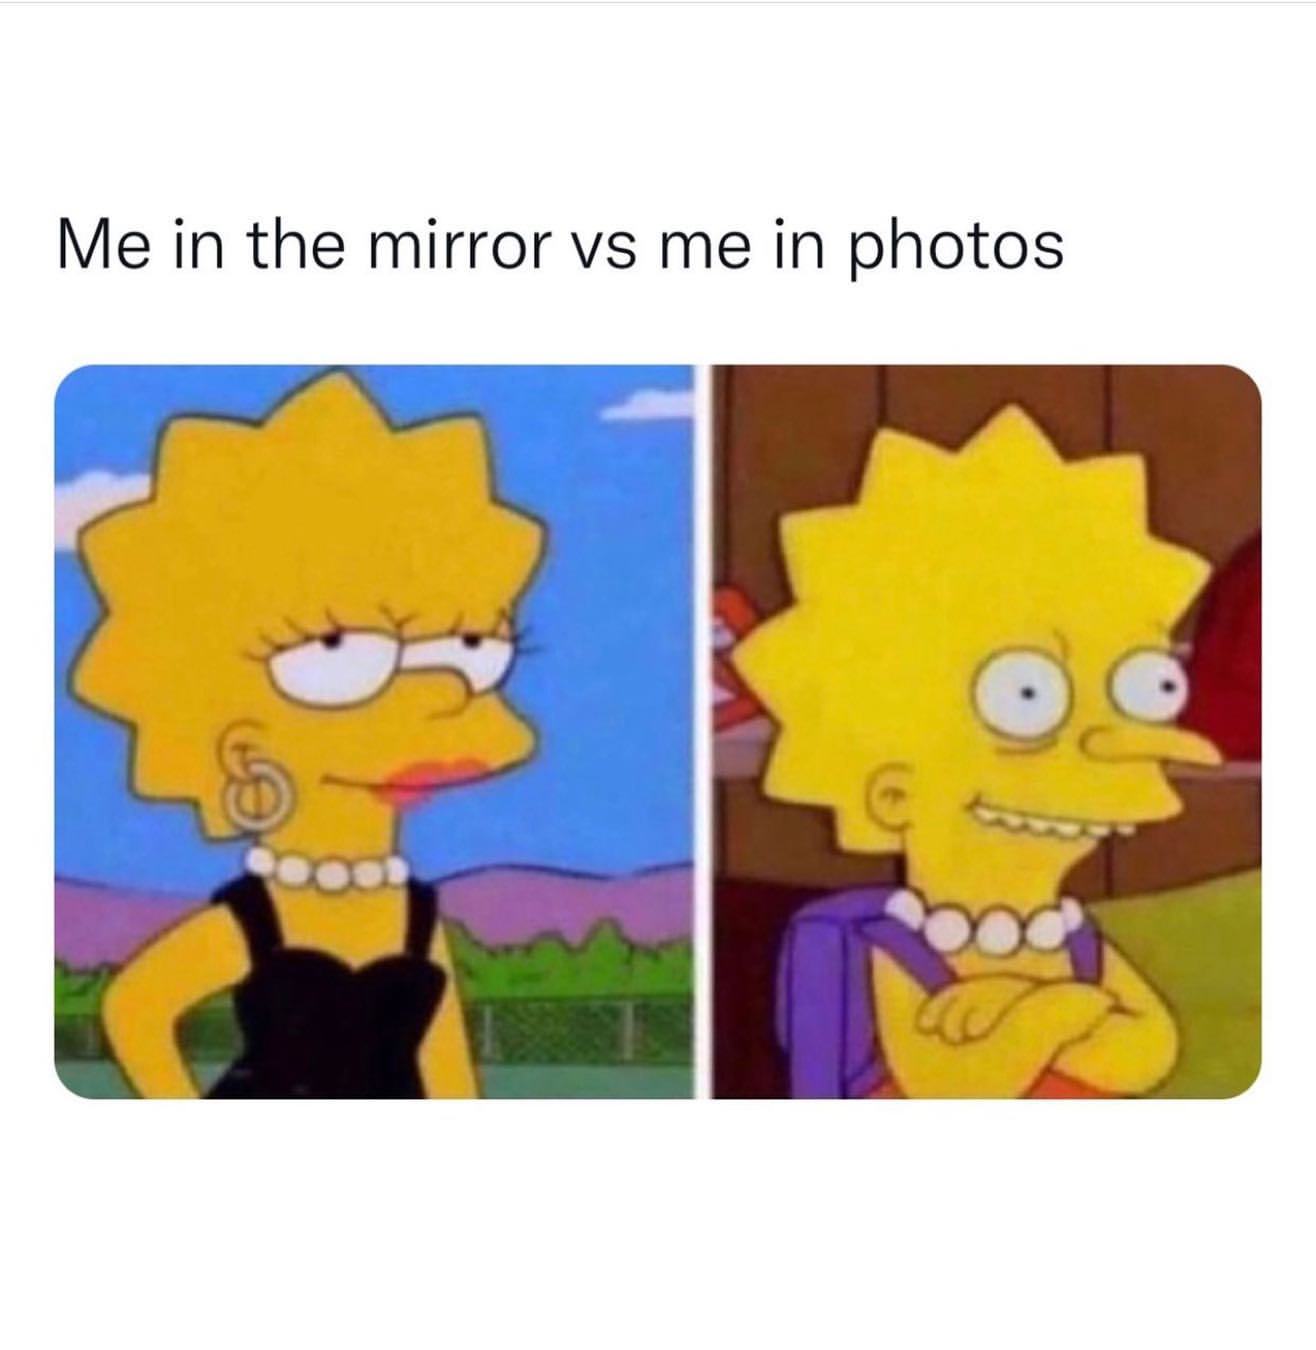 Me in the mirror vs me in photos.